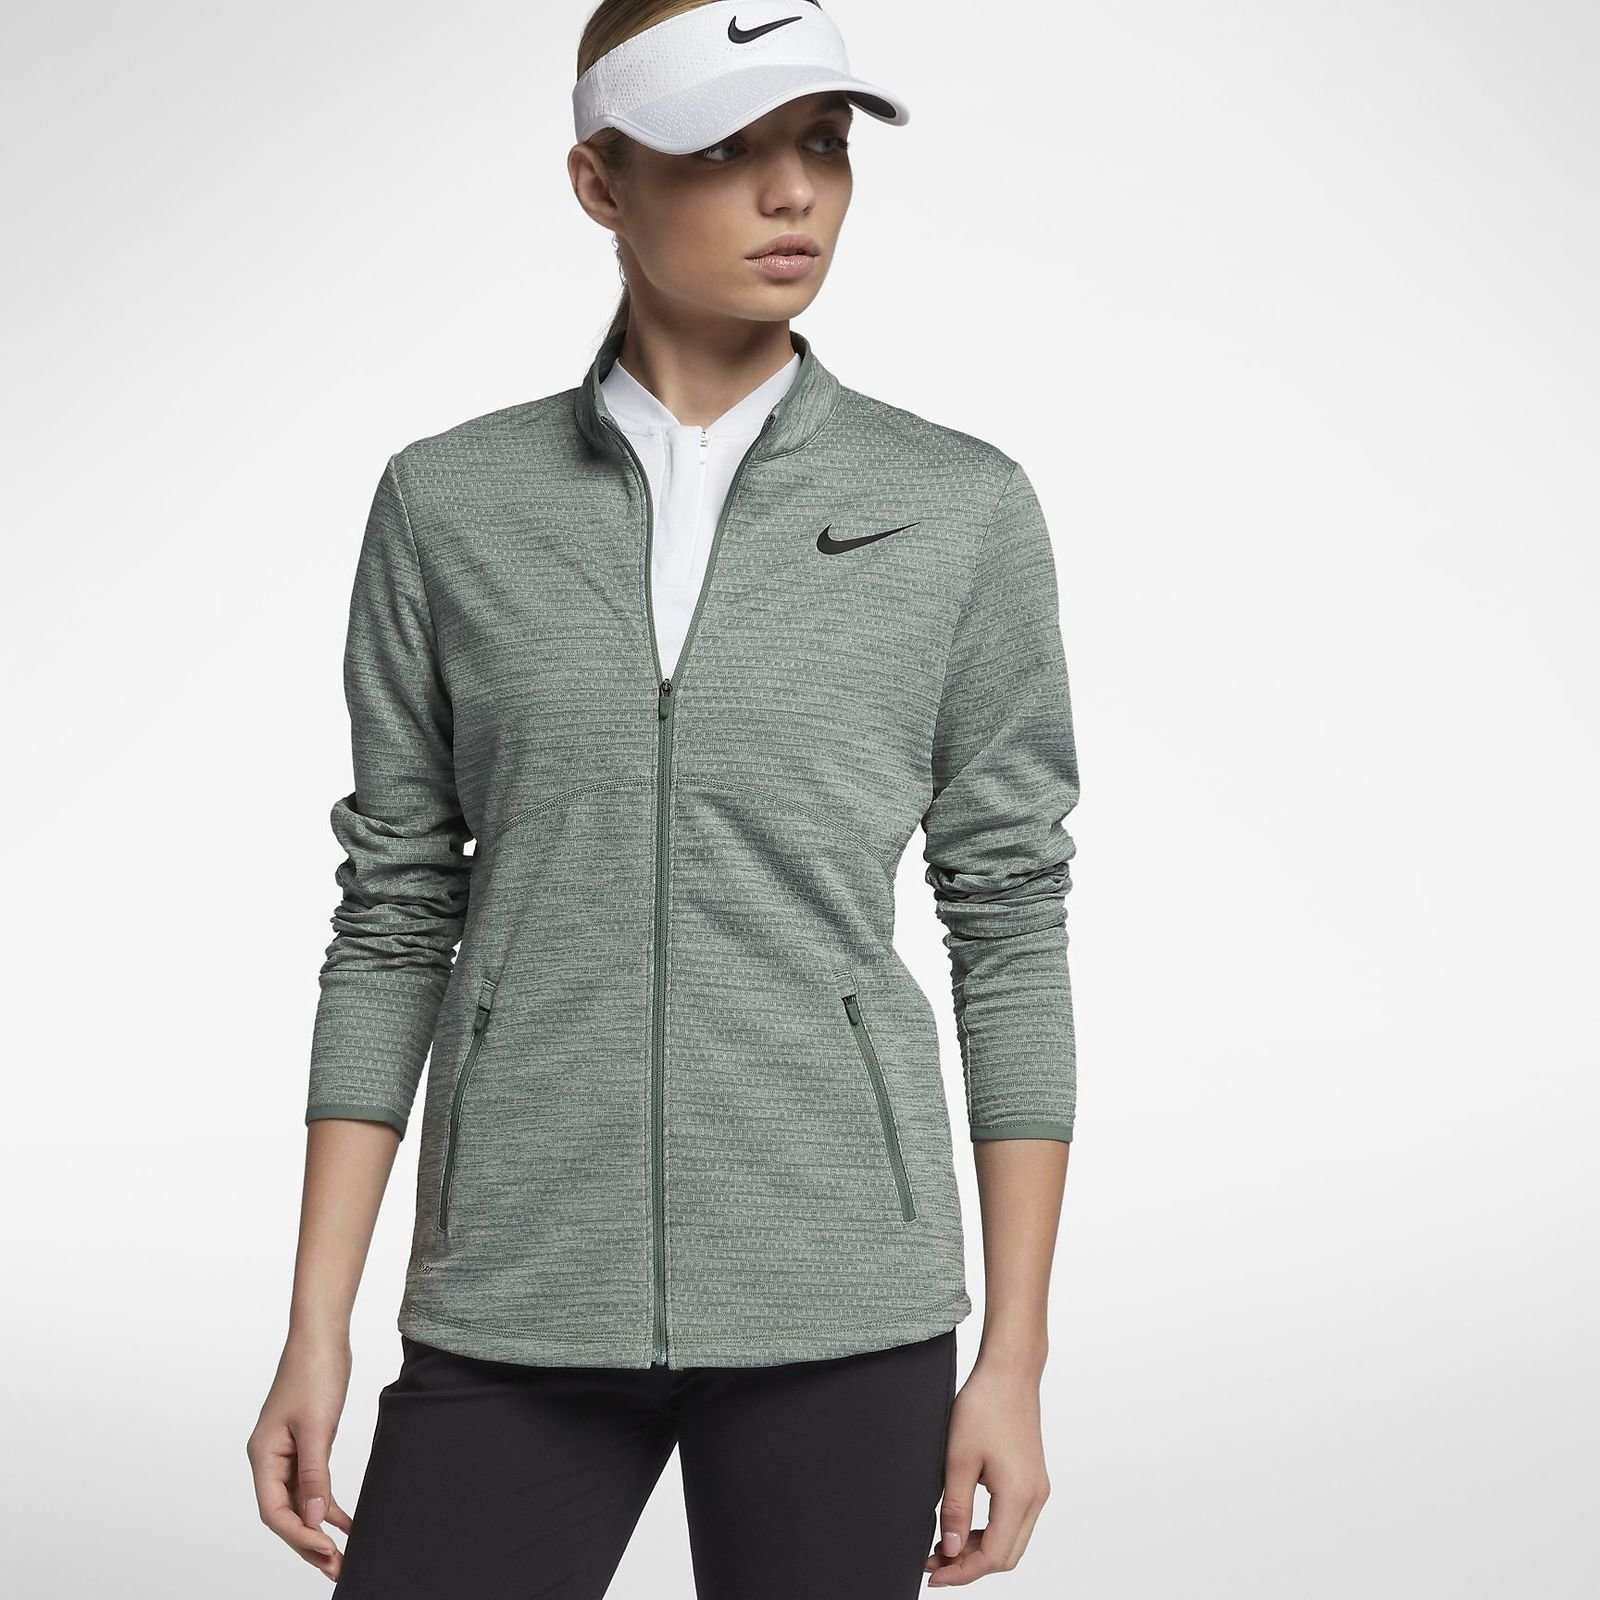 Chaqueta impermeable Nike Womens Dry Top Hz Clay Green/Black S